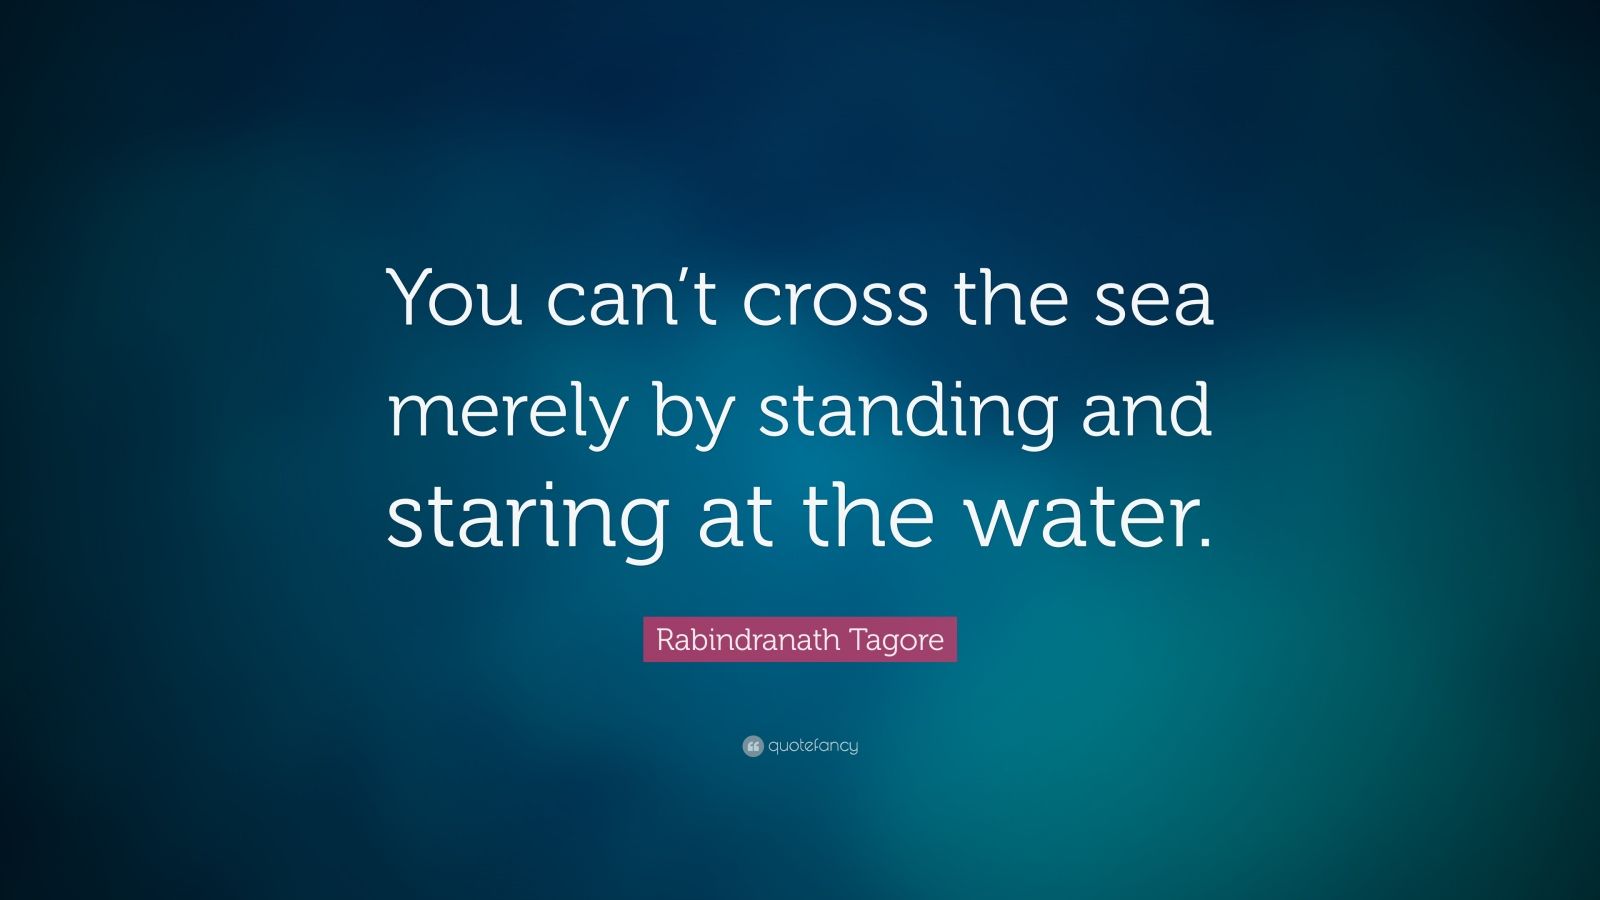 Rabindranath Tagore Quote: “You can’t cross the sea merely by standing ...